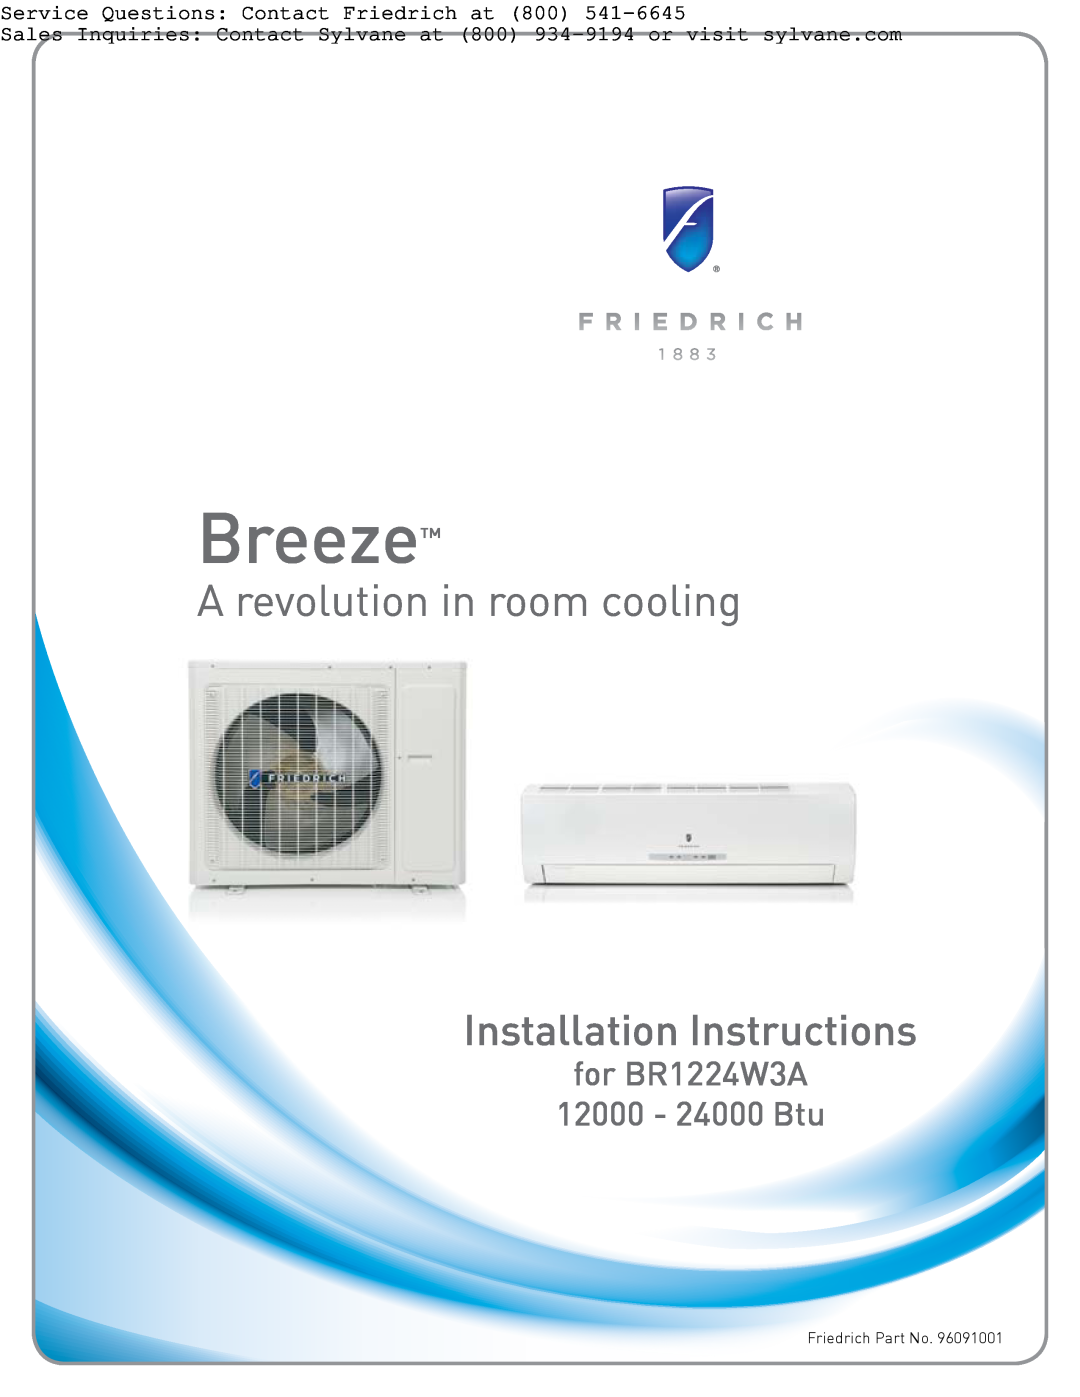 Friedrich Breeze, BR1224W3A installation instructions A revolution in room cooling, Installation Instructions 